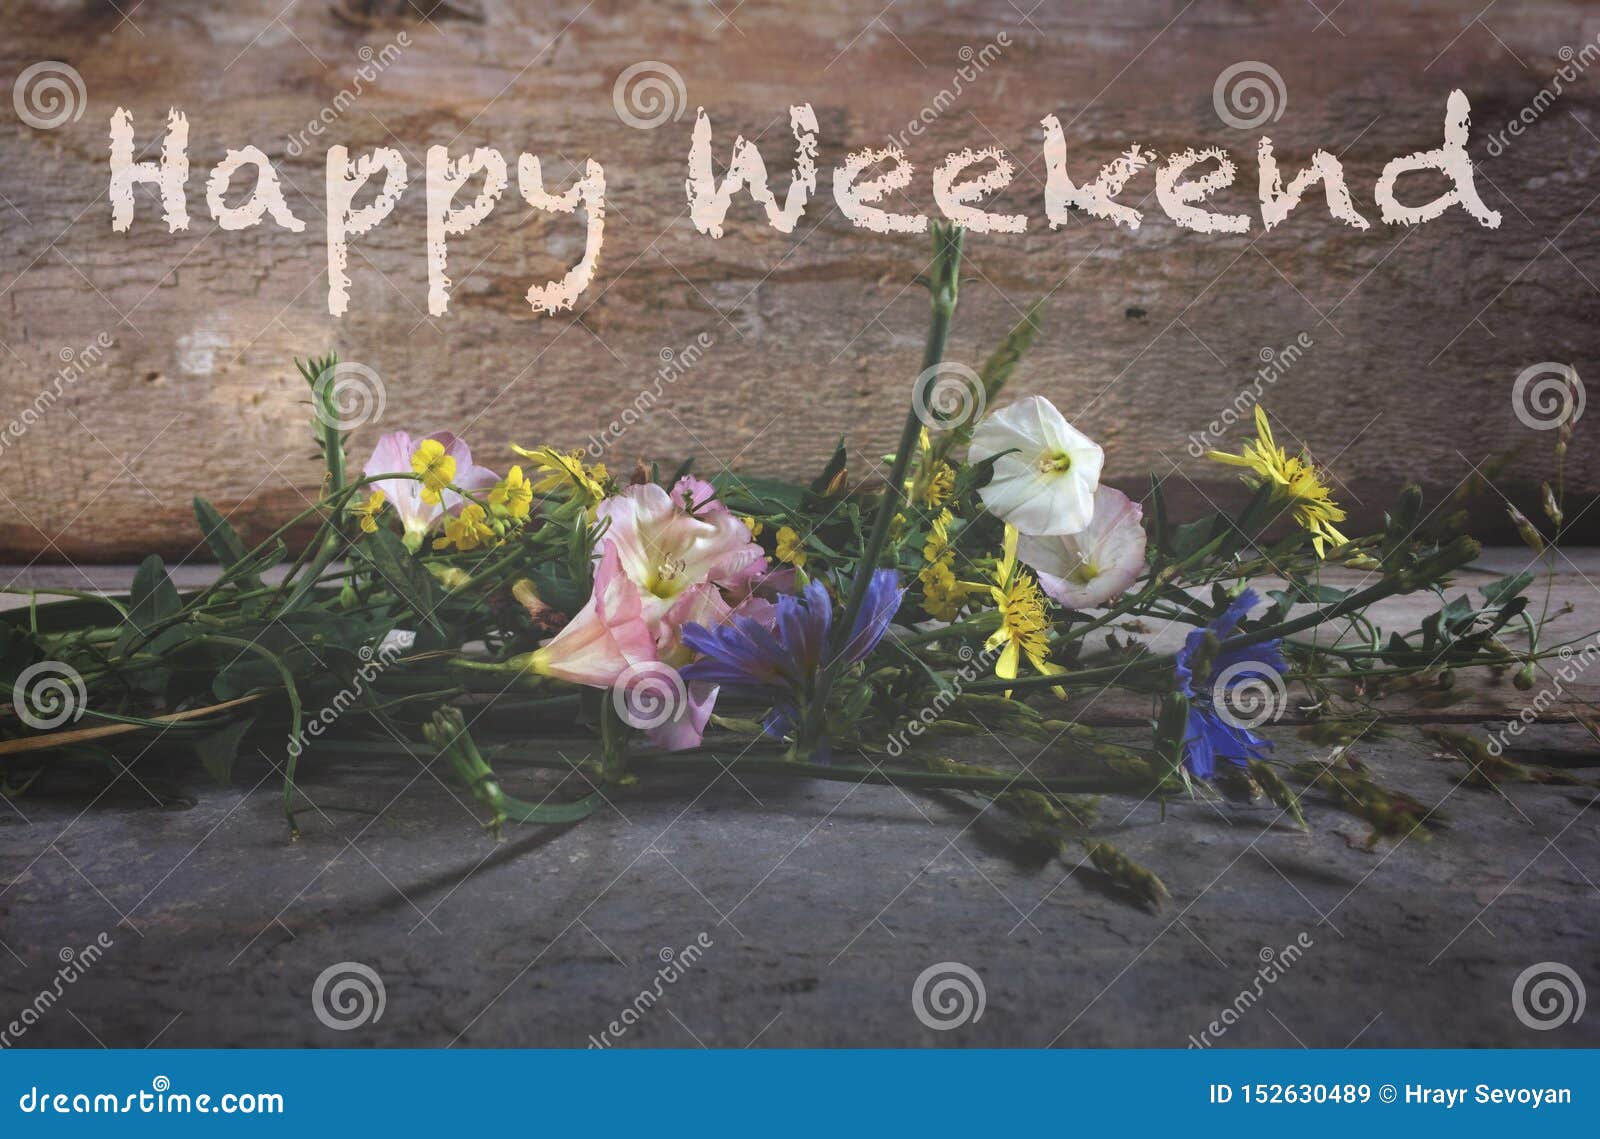 145 Text Happy Weekend White Flowers Stock Photos - Free & Royalty ...